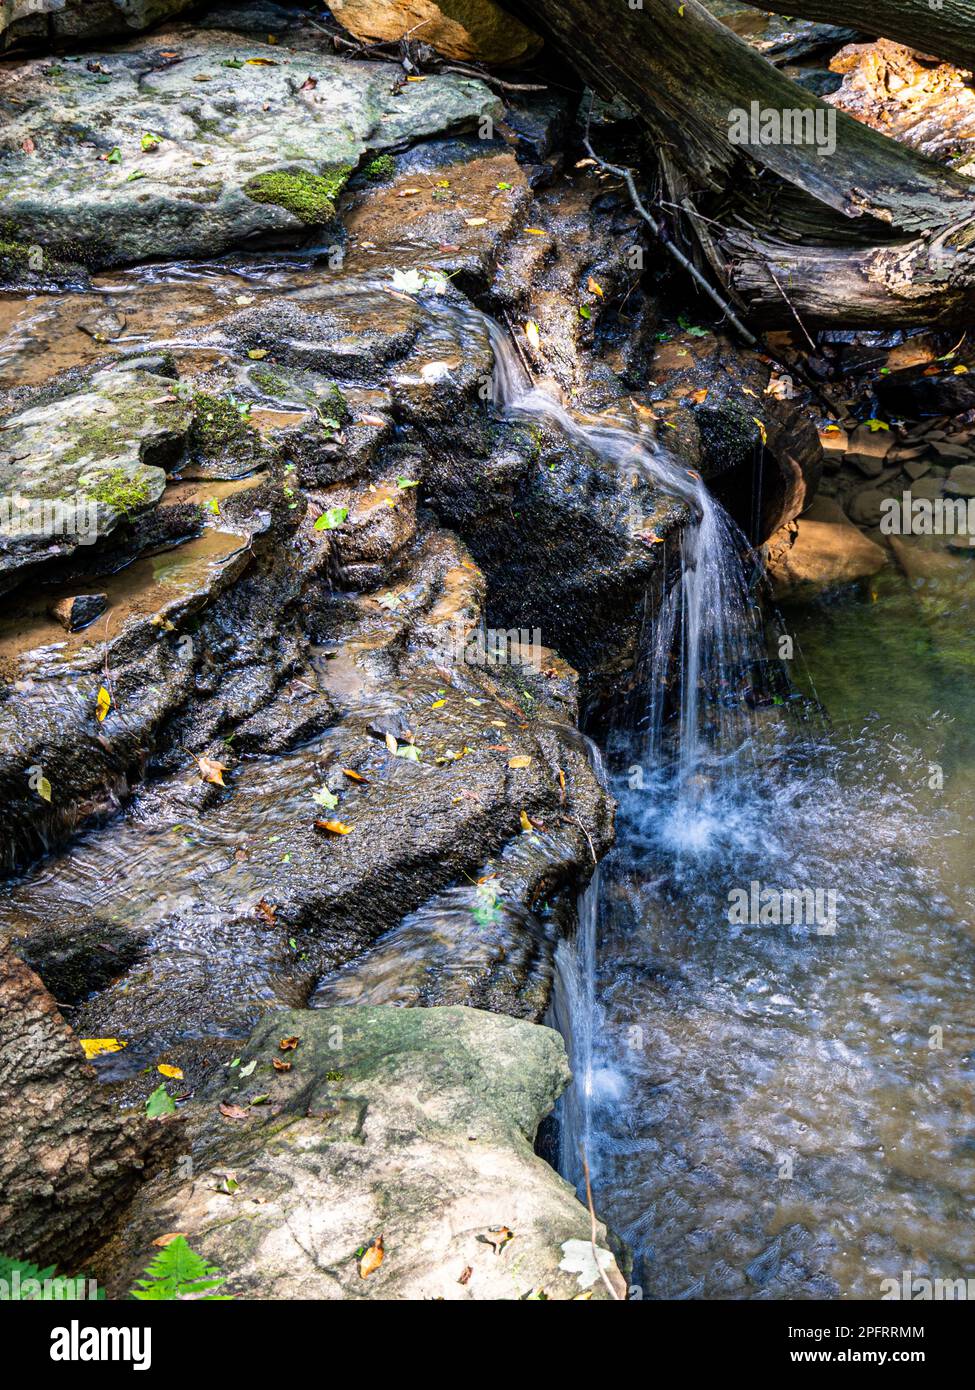 Nestled in the heart of Harrison Hills County Park in Natrona Heights, Pennsylvania, lies a tranquil haven for nature lovers. This picturesque scene c Stock Photo